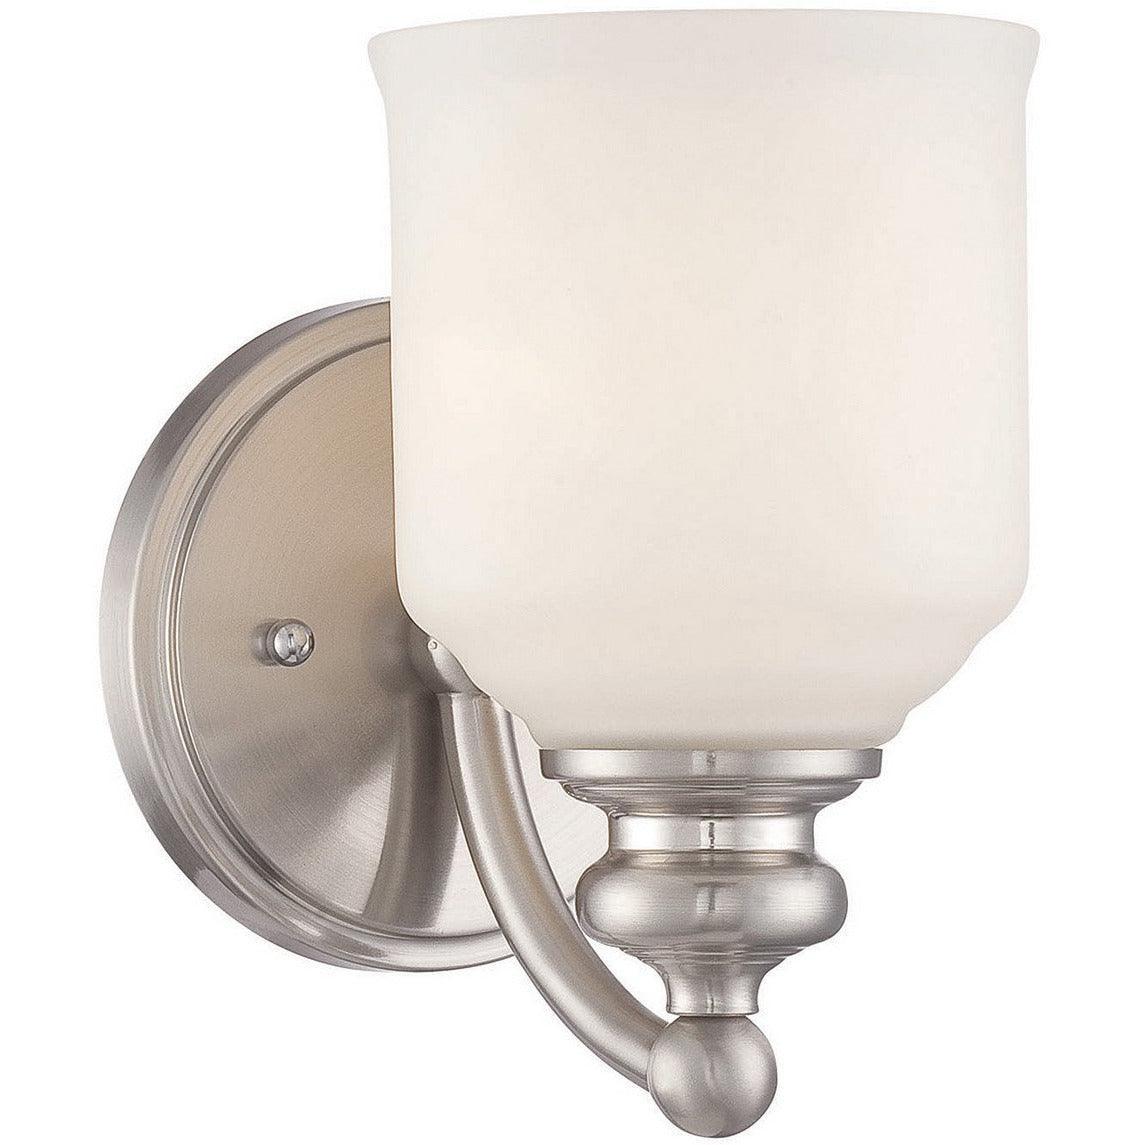 Savoy House - Melrose One Light Wall Sconce - 9-6836-1-SN | Montreal Lighting & Hardware